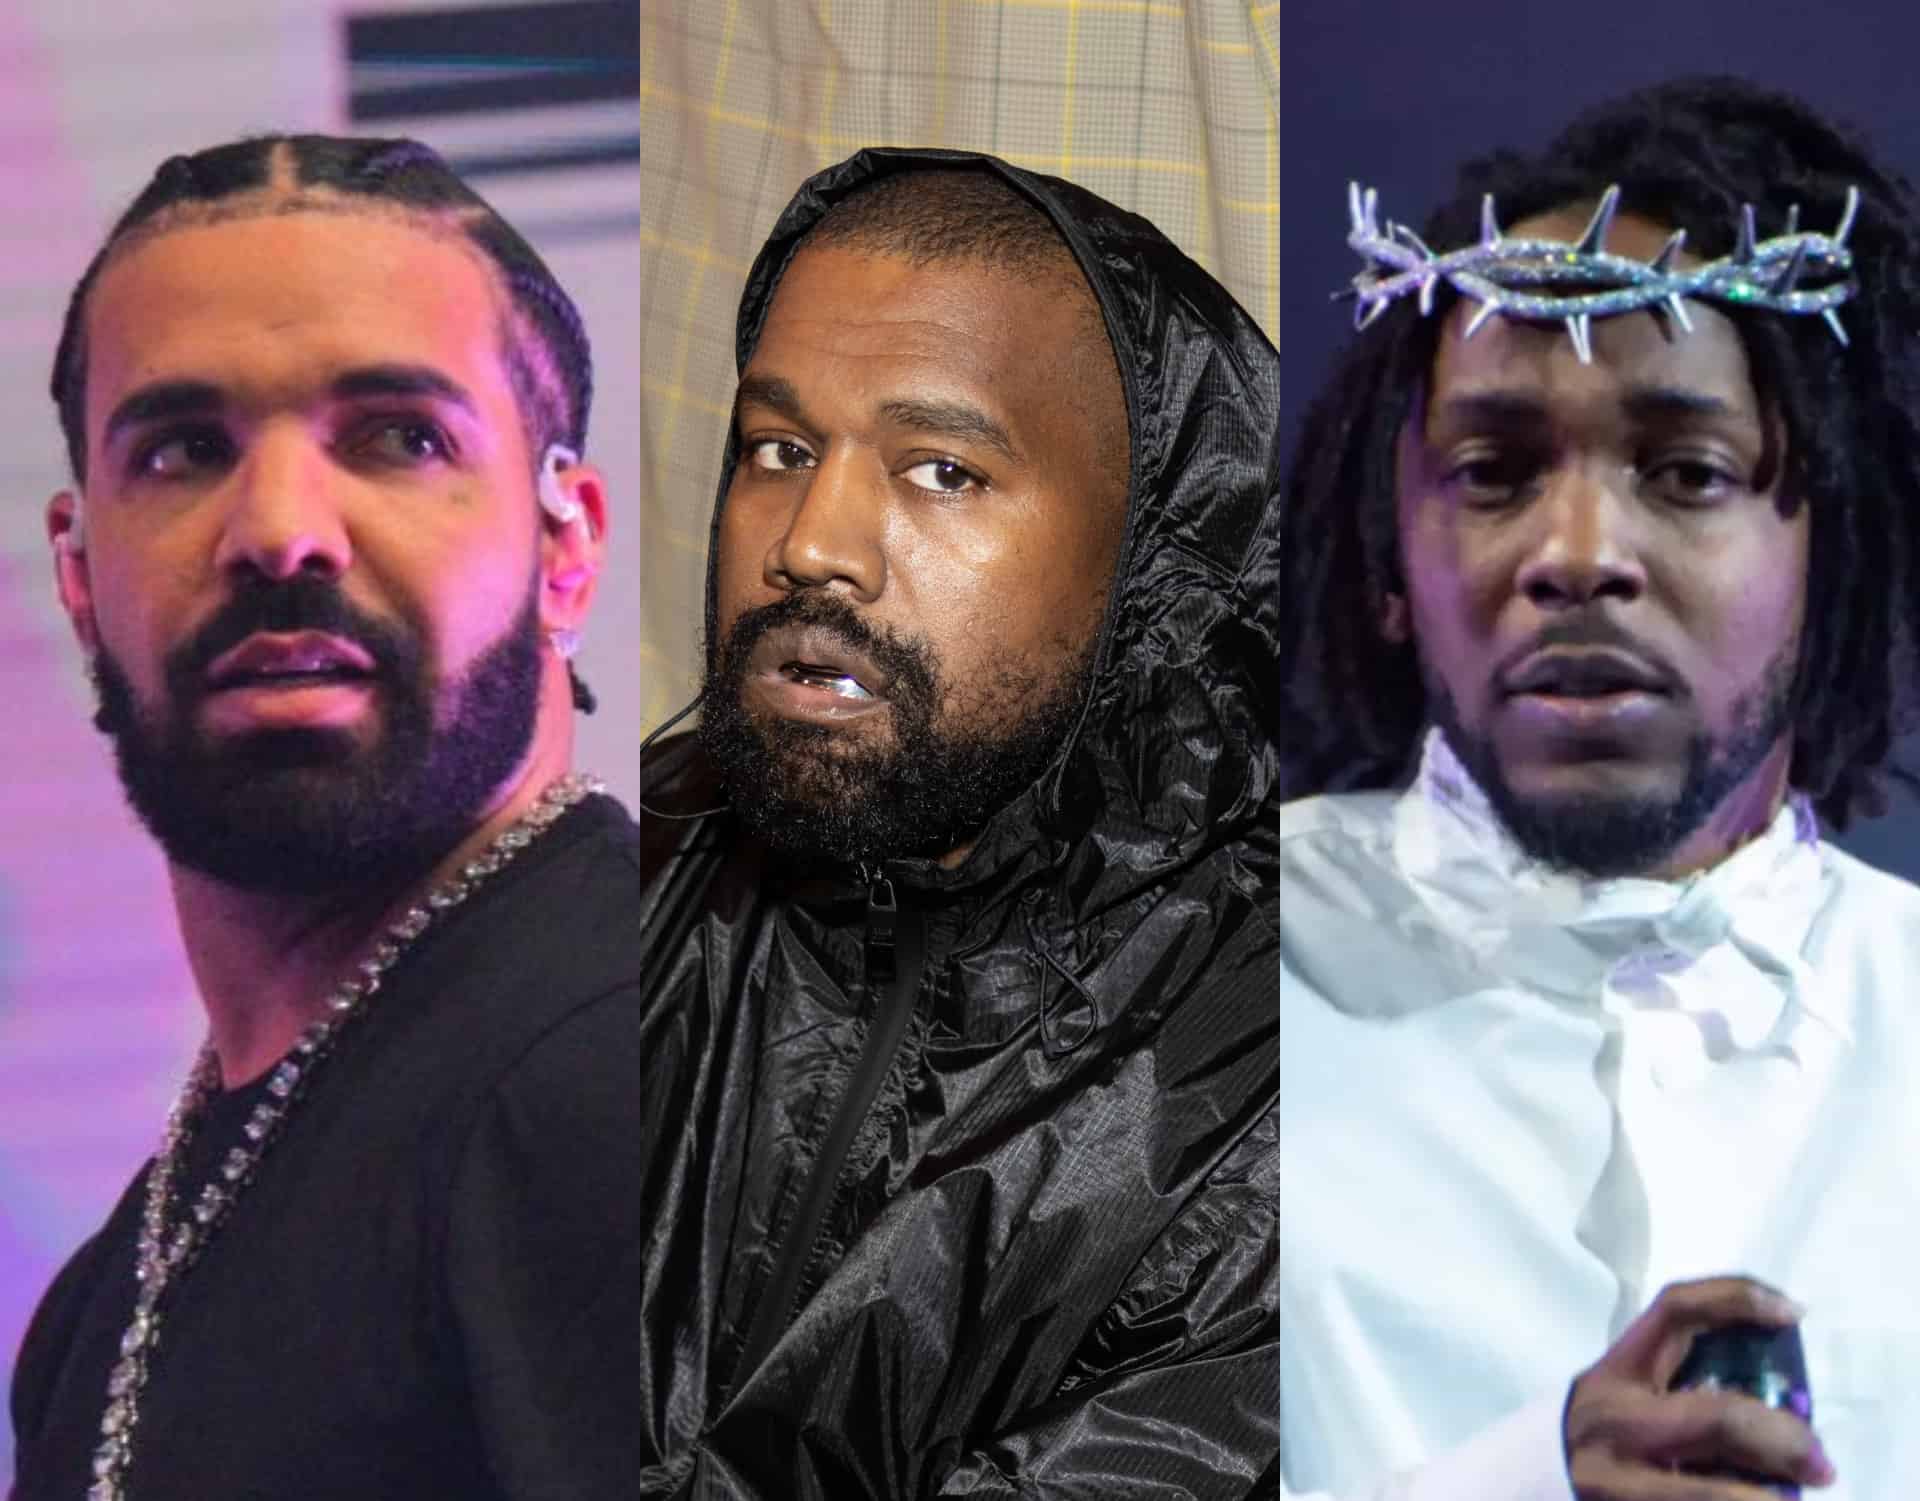 Kanye West Says He Washed Both Kendrick Lamar & Drake There Is Only One GOAT